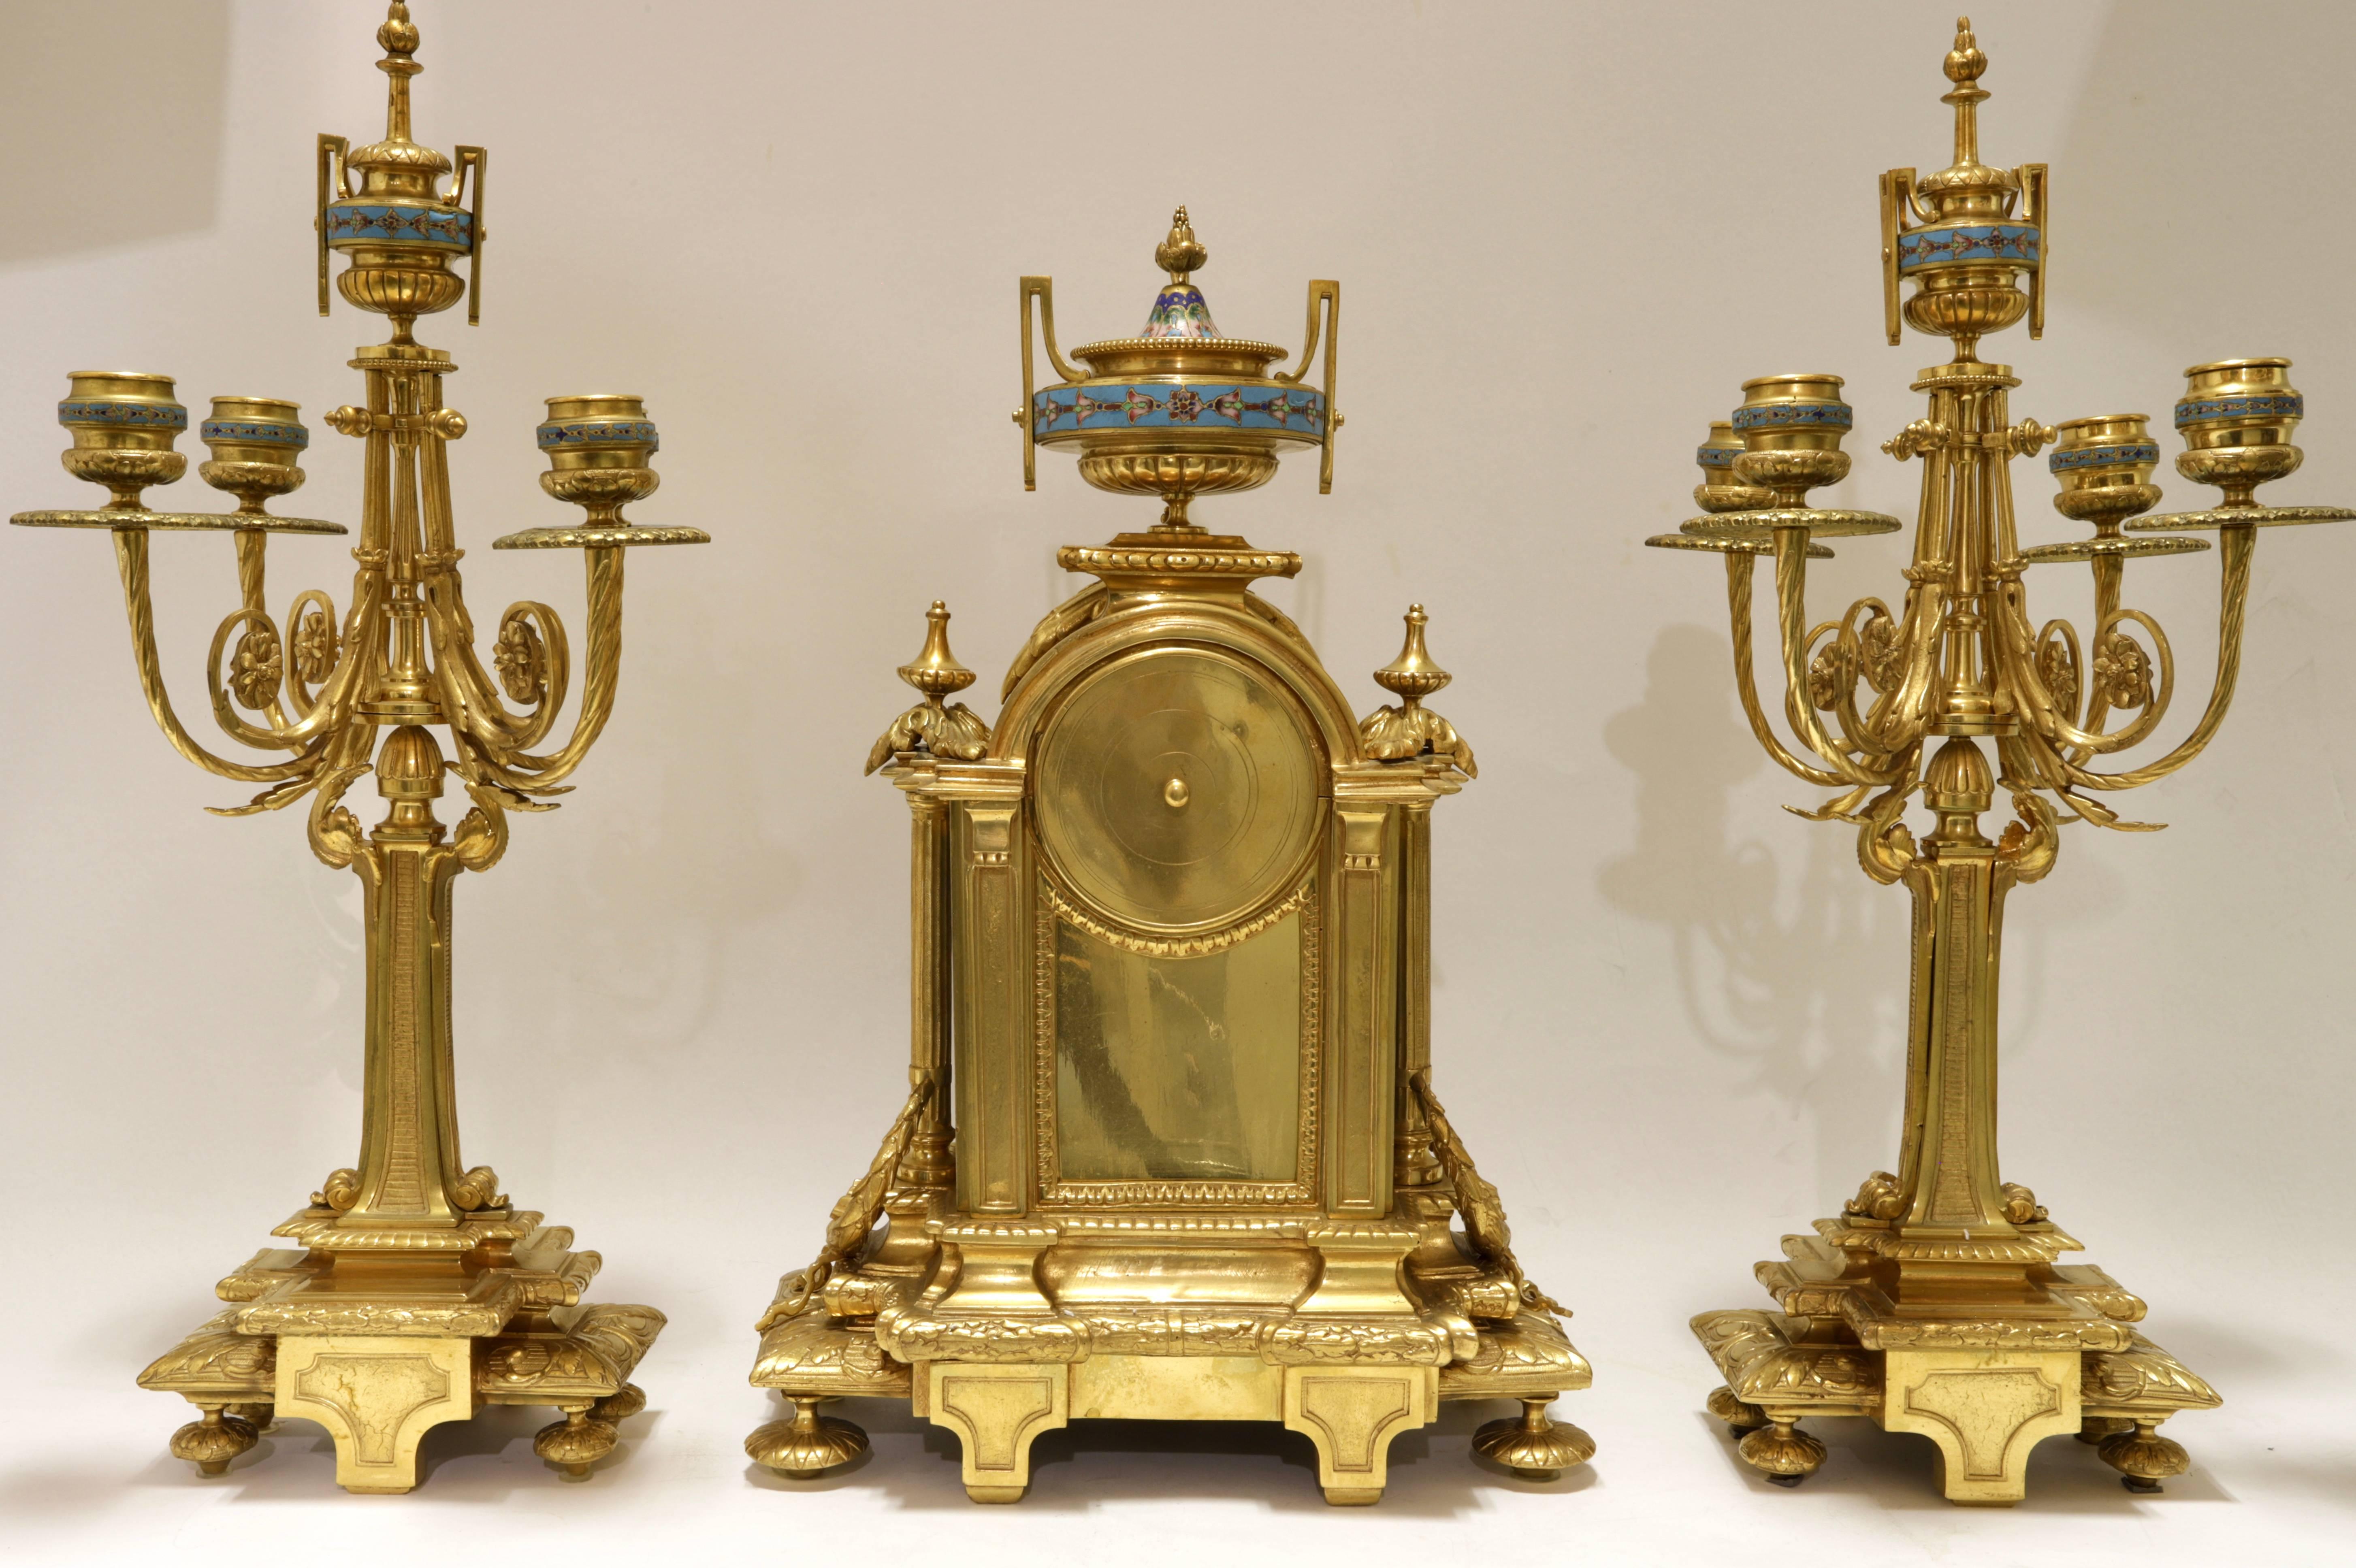 Very fine quality French 19th century Louis XVI style bronze and champlevé enamel clock set.
Consisting of a clock and a pair of matching candelabras.